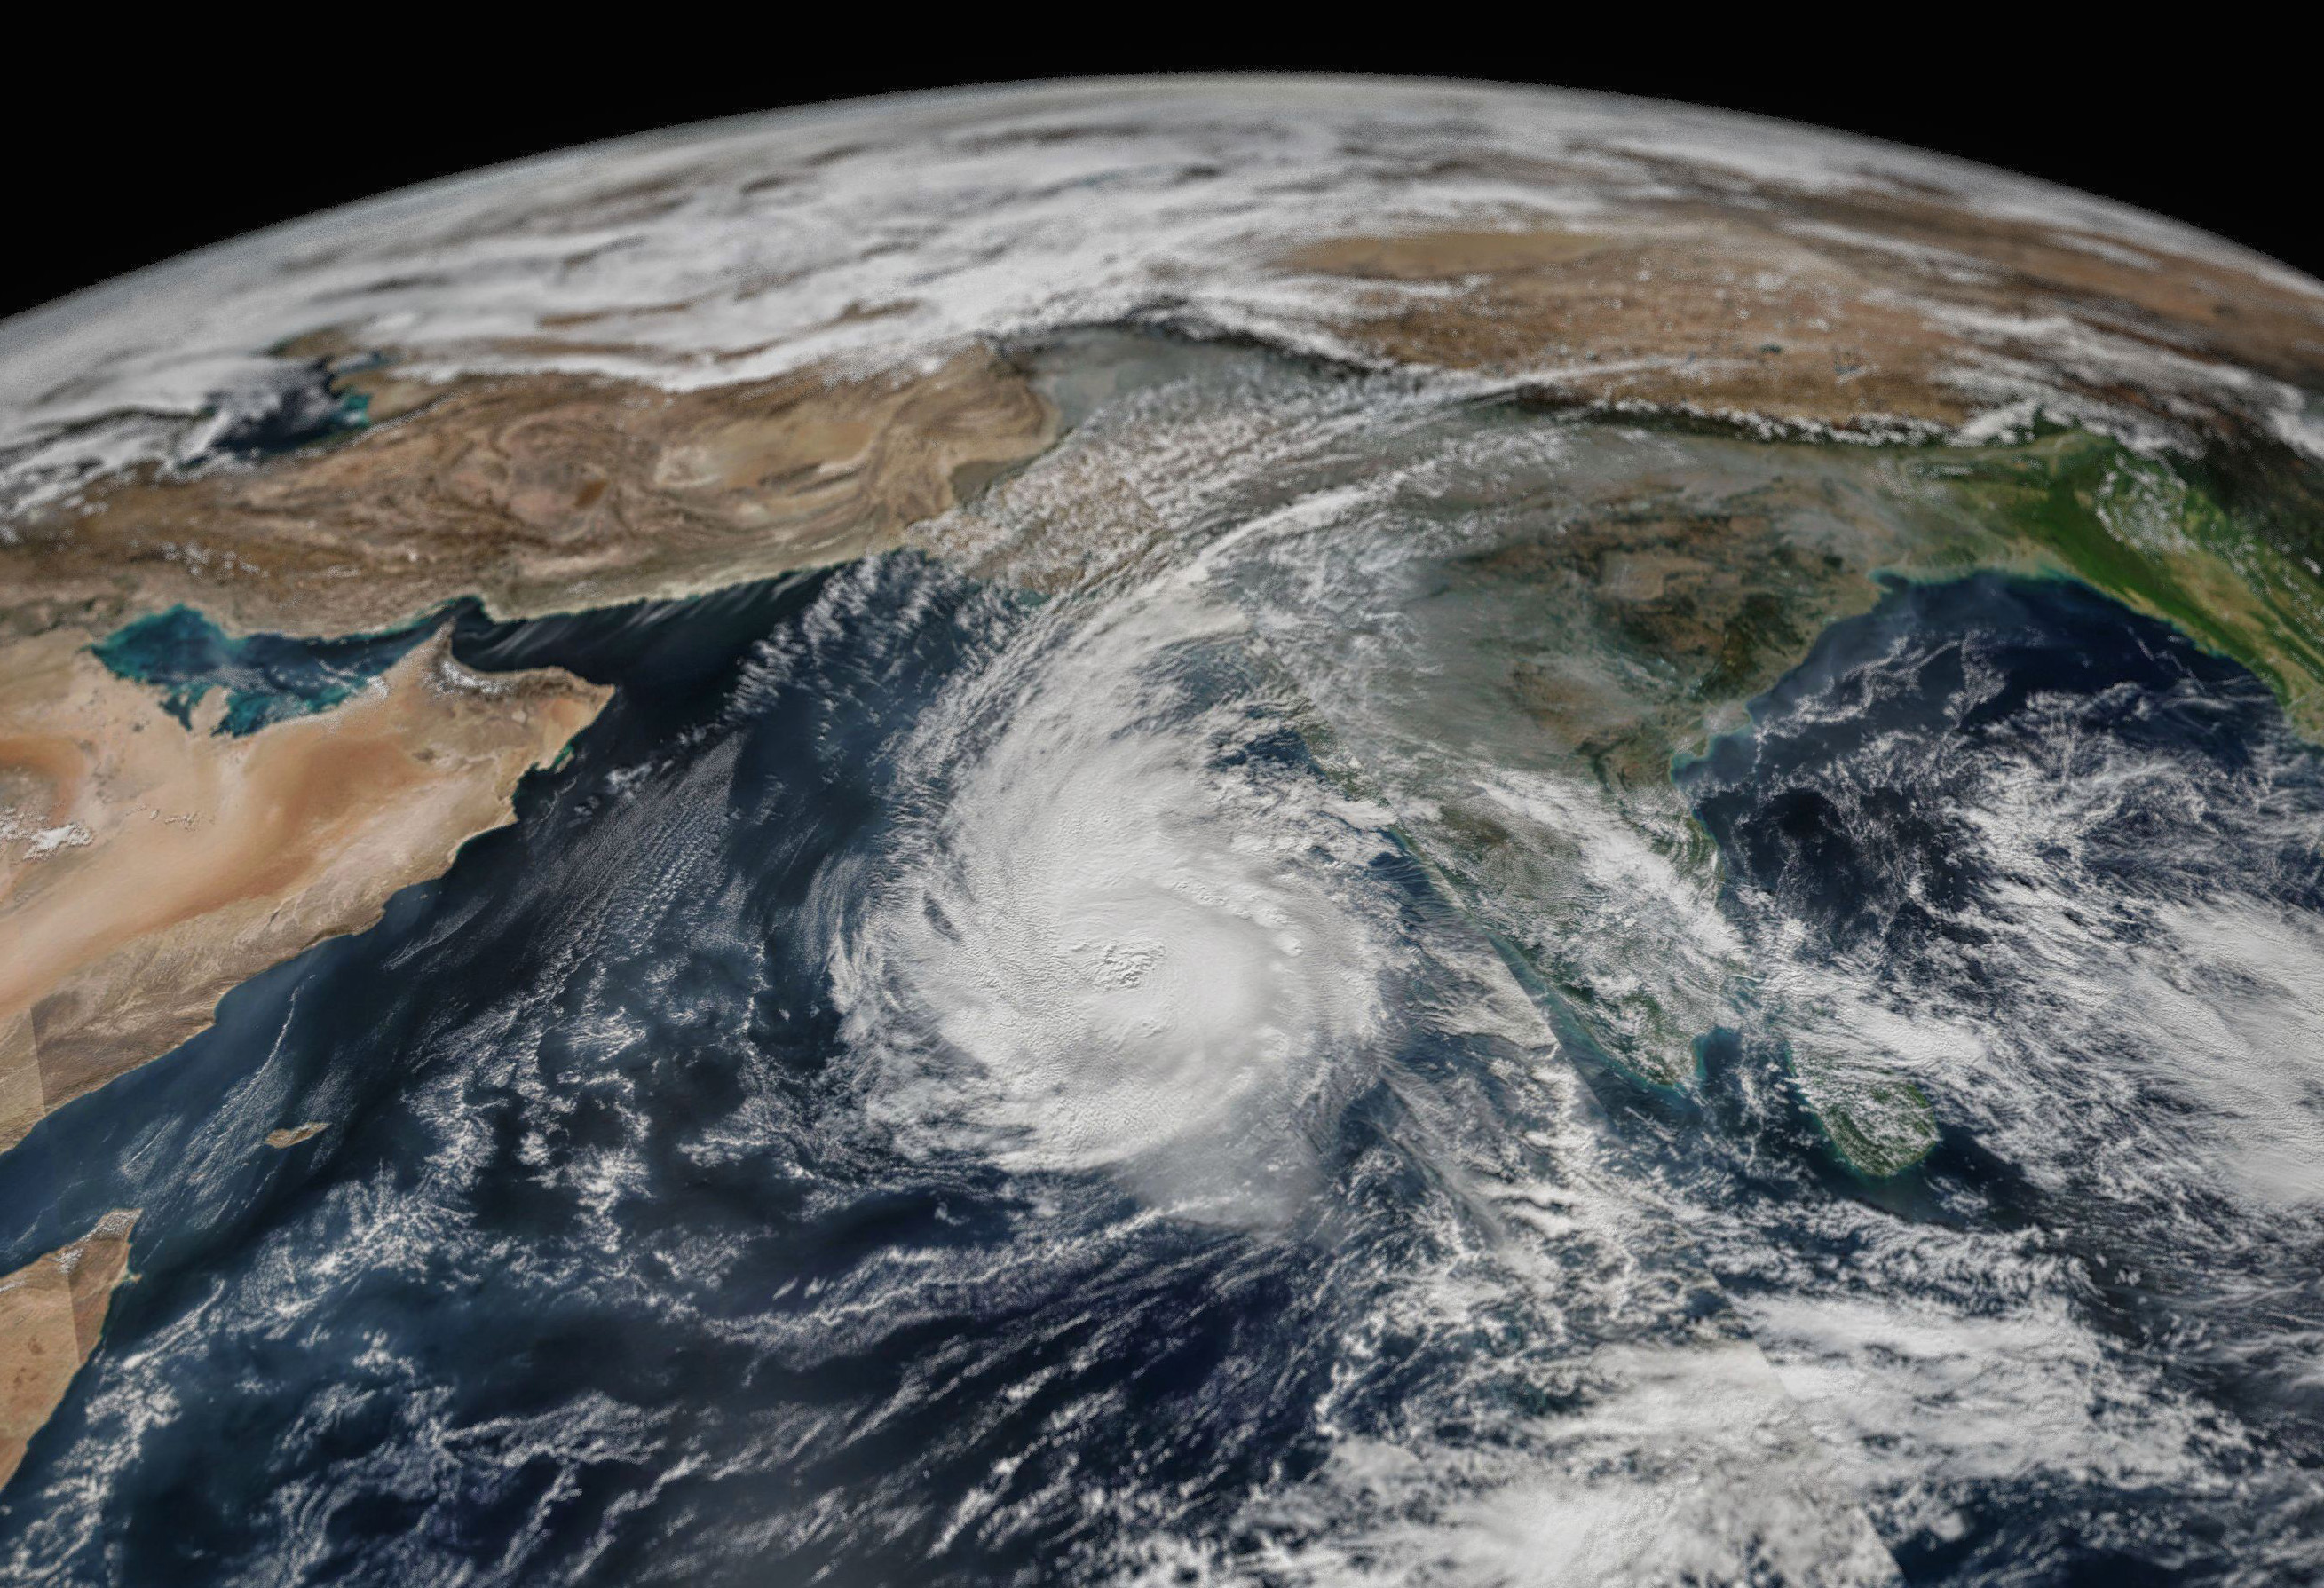 Cyclone Ockhi over the Arabian Sea on 3 December 2017. Based on VIIRS / SuomiNPP satellite data. Image: Antti Lipponen/ Flickr.